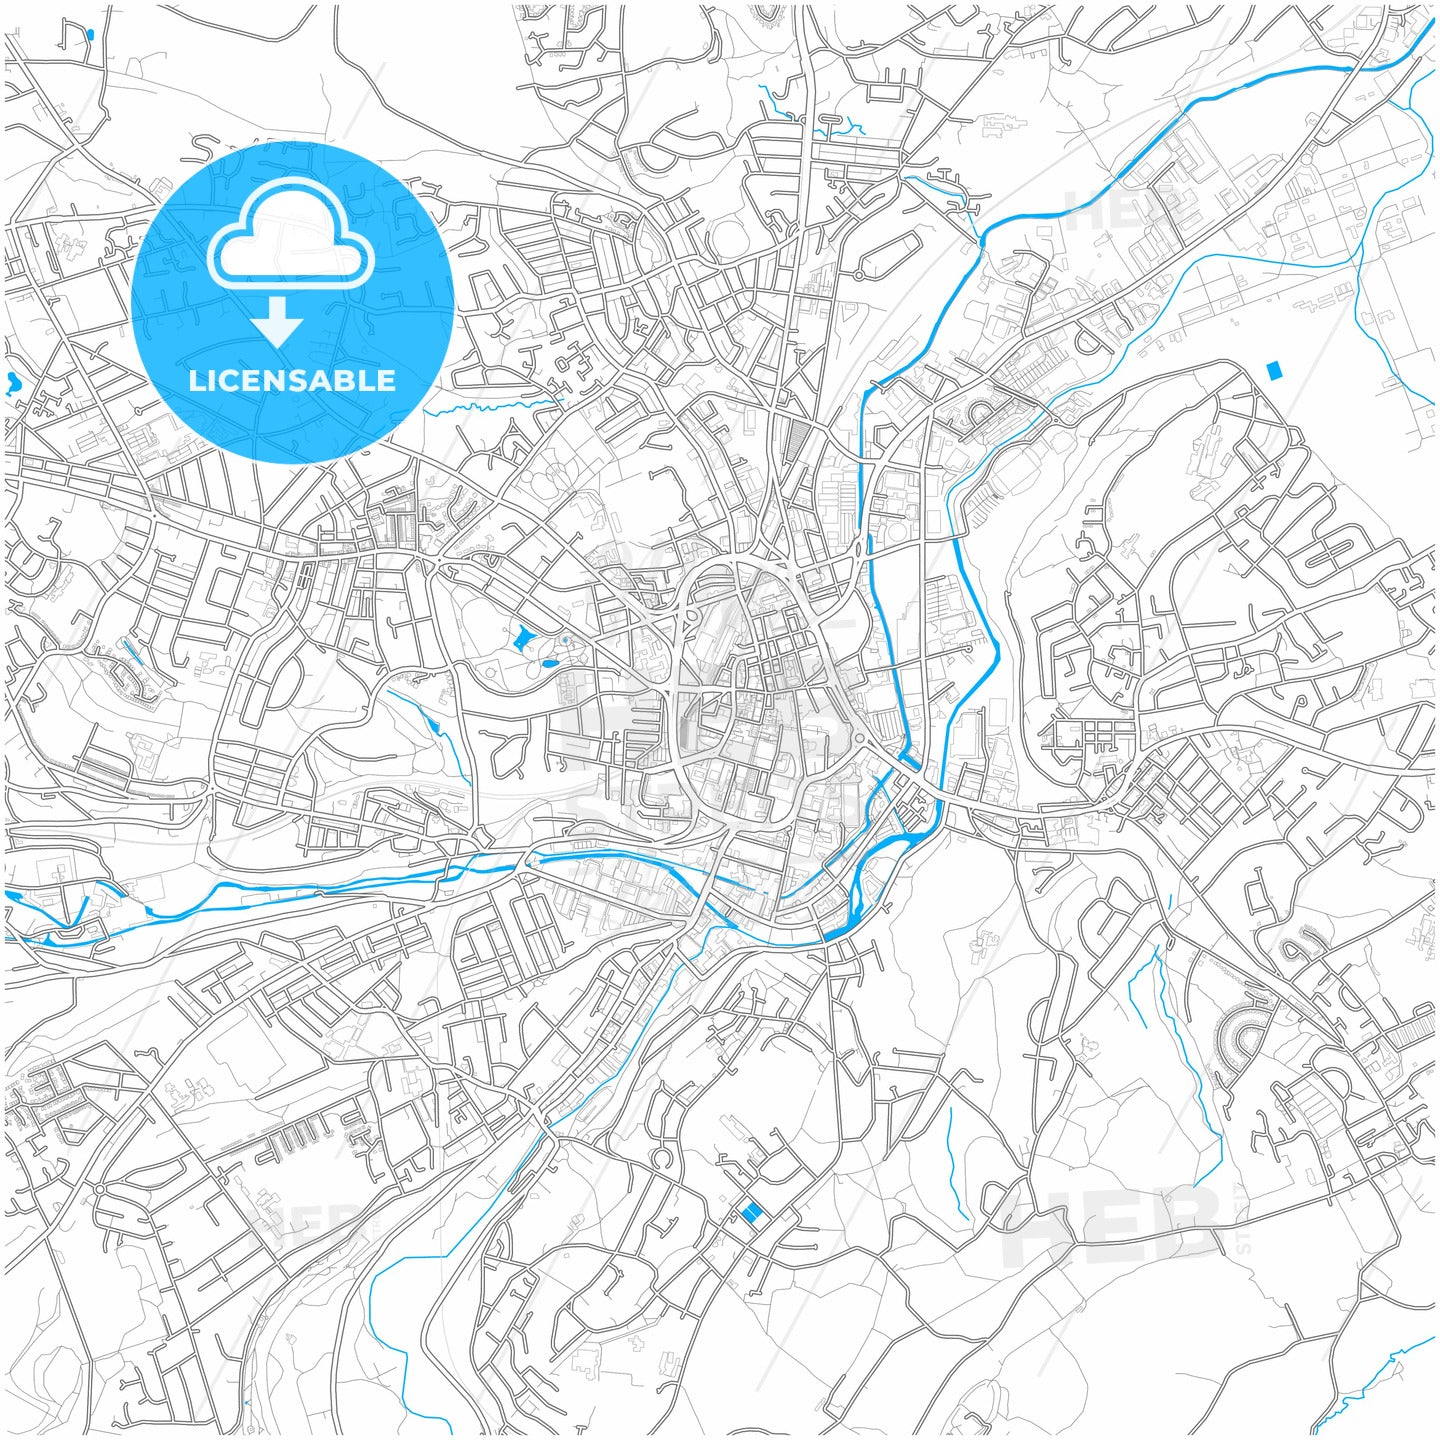 Huddersfield, Yorkshire and the Humber, England, city map with high quality roads.